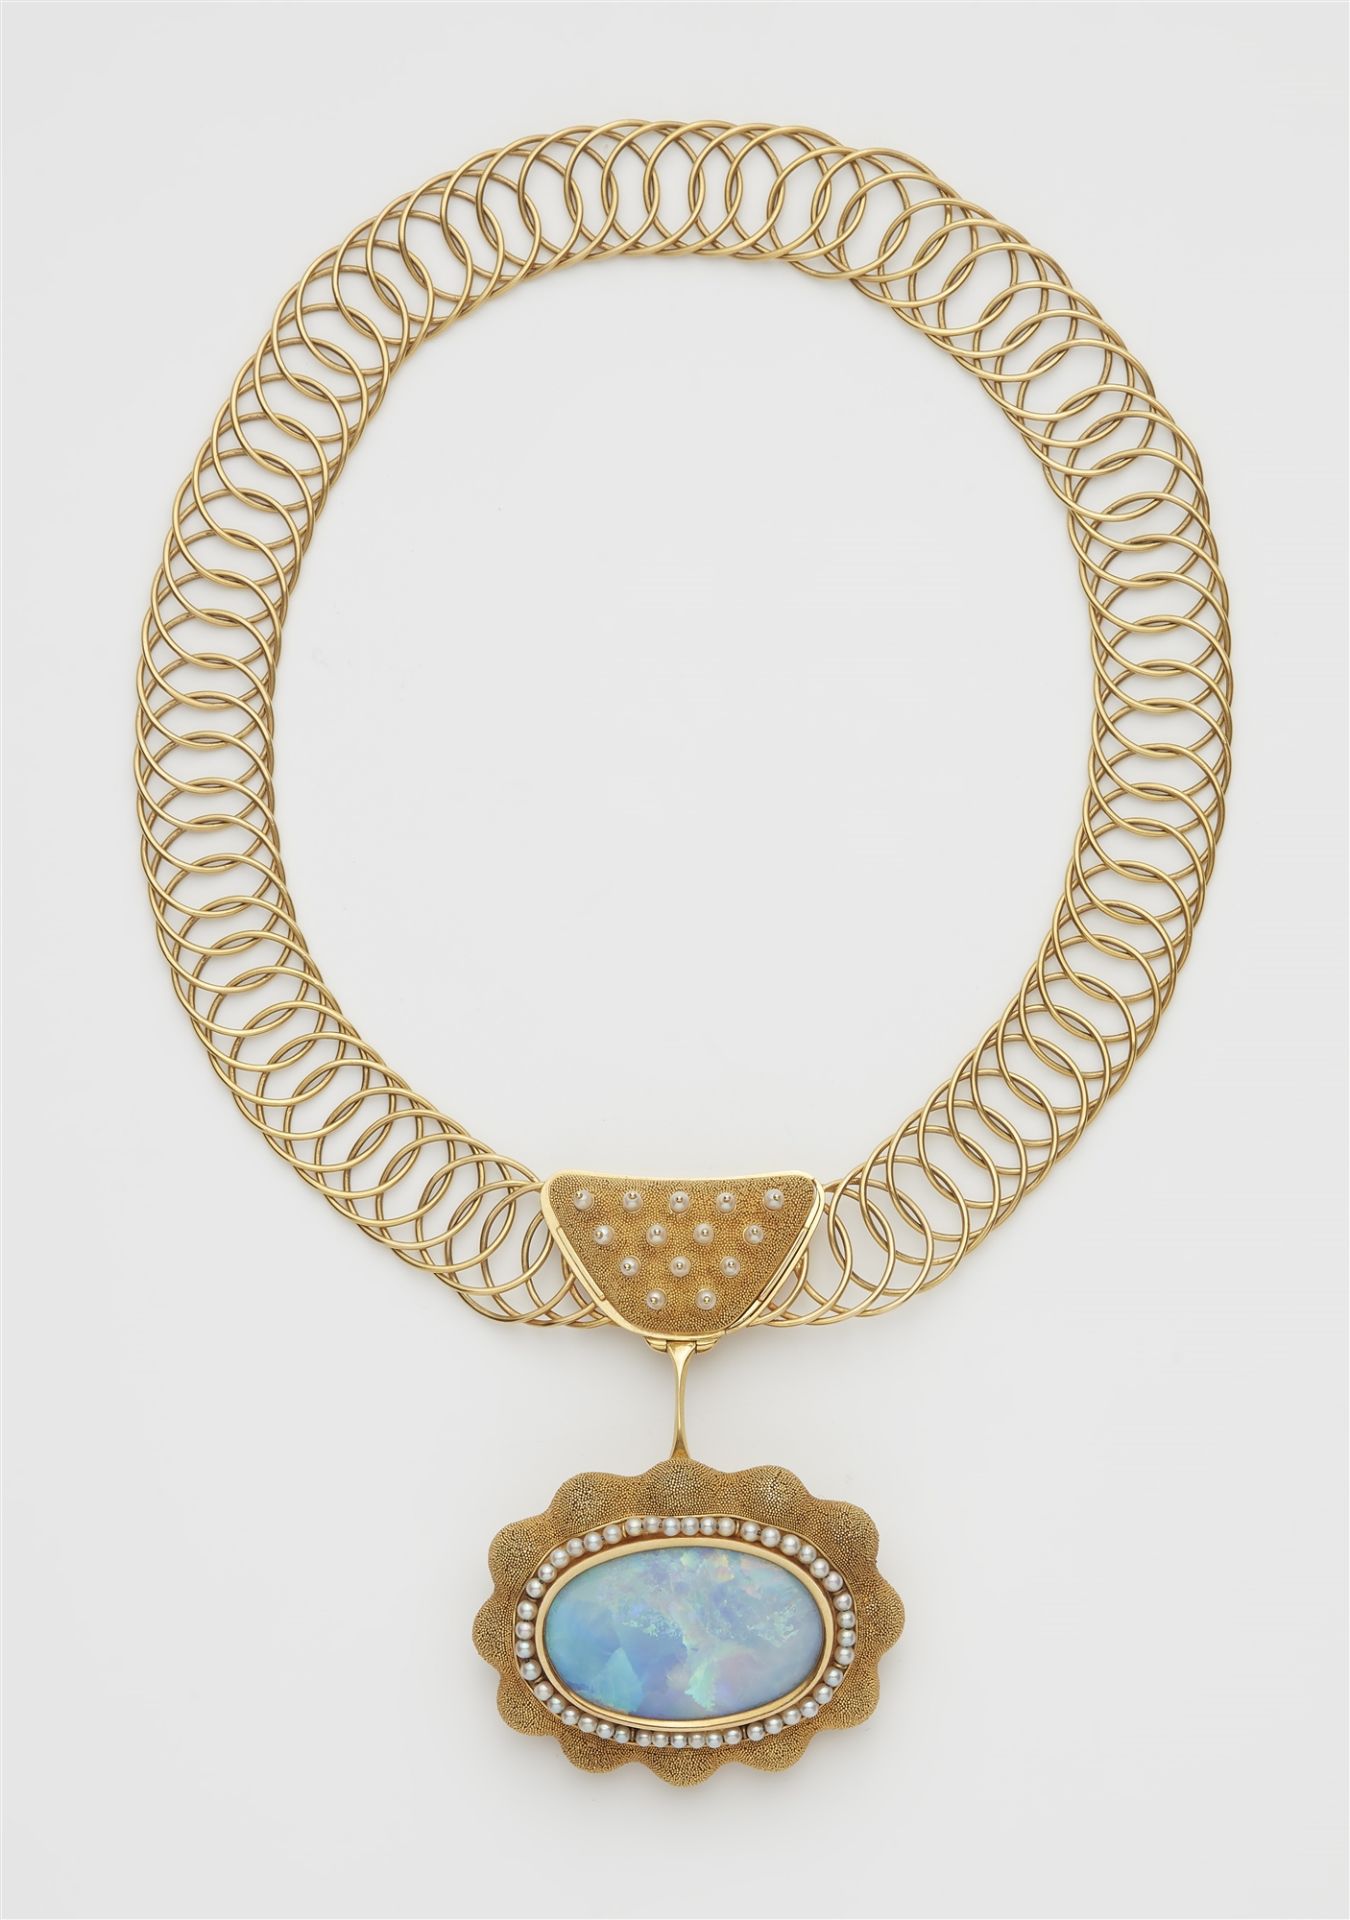 A German hand-forged 18k gold wire necklace with a large granulation and black opal pendant brooch.